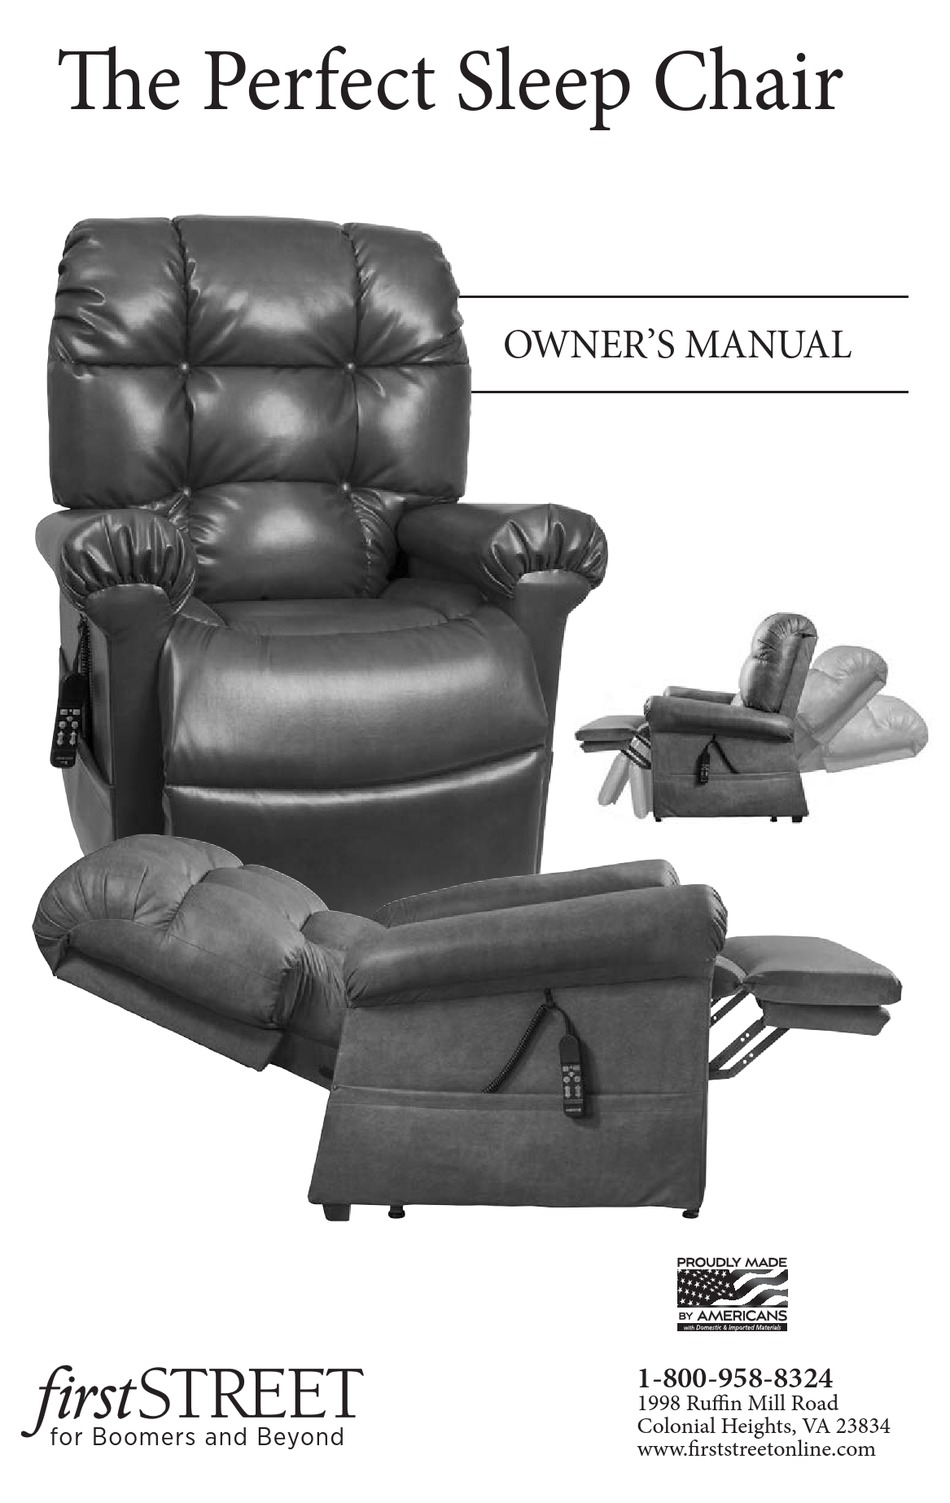 FIRSTSTREET THE PERFECT SLEEP CHAIR OWNER'S MANUAL Pdf Download